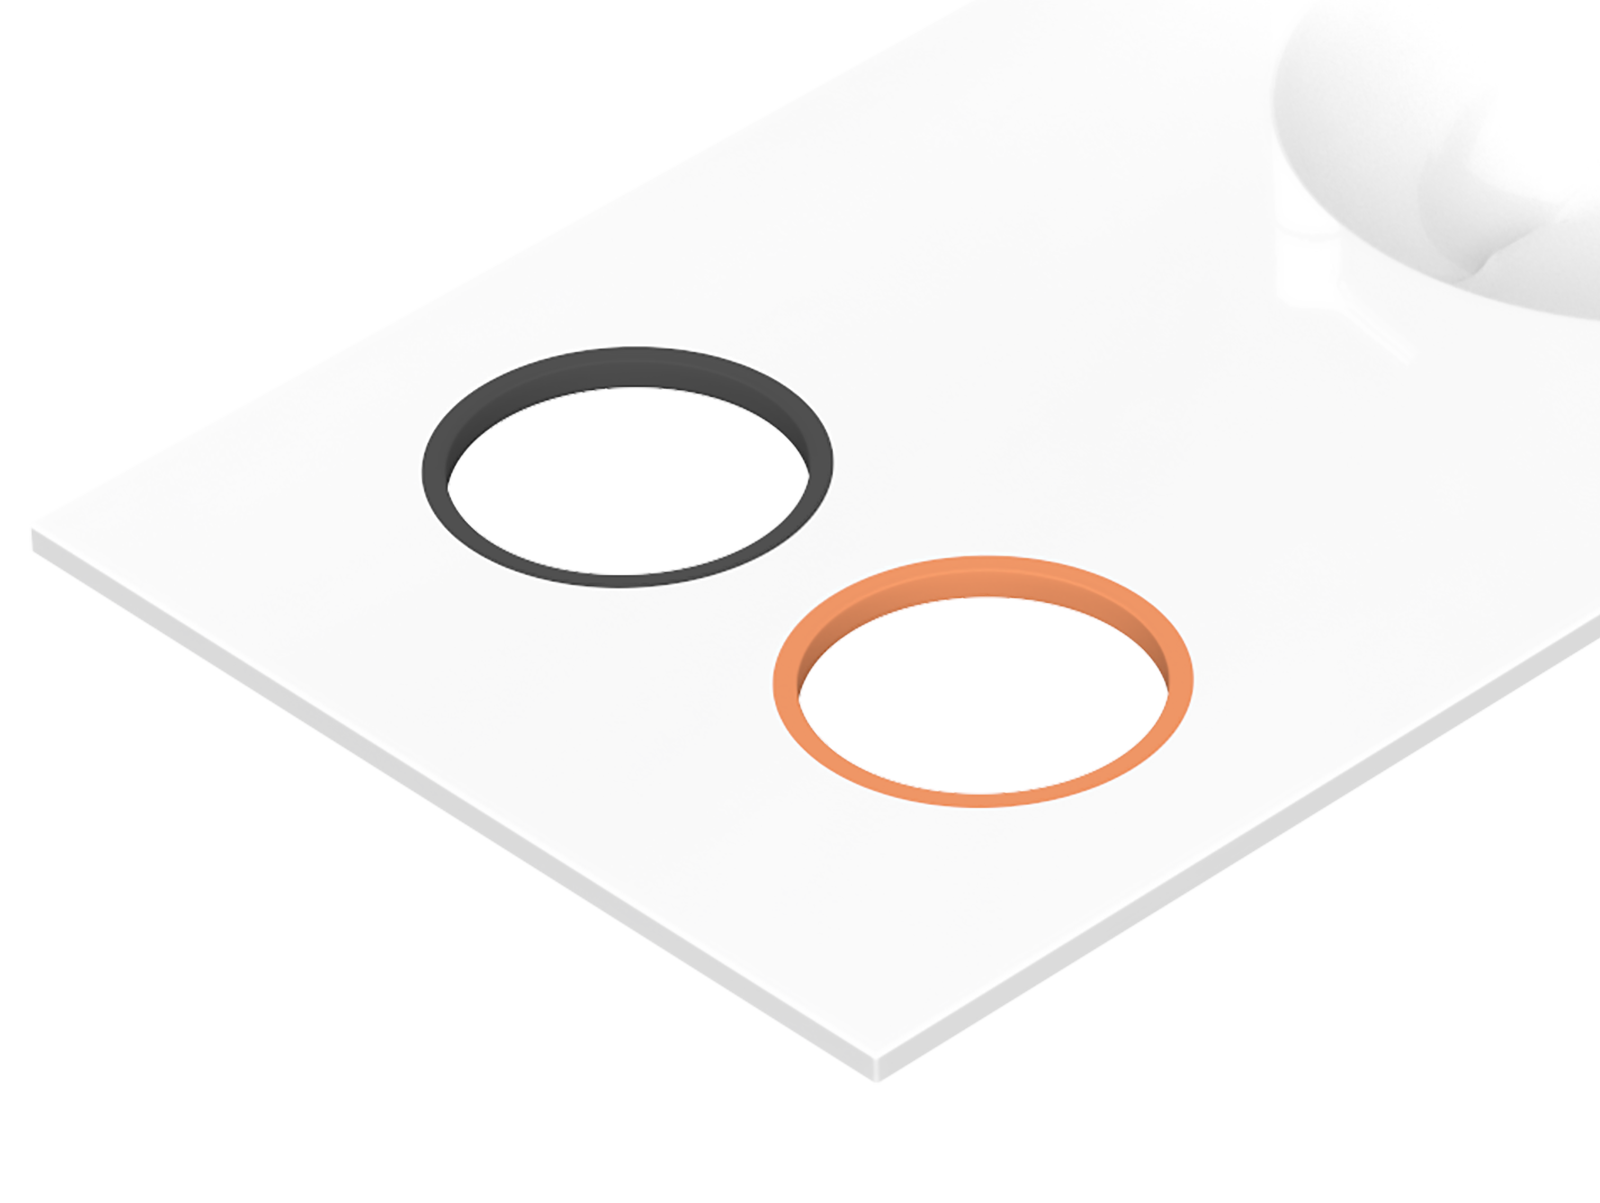 Paper bin openings with color rings (black and orange)